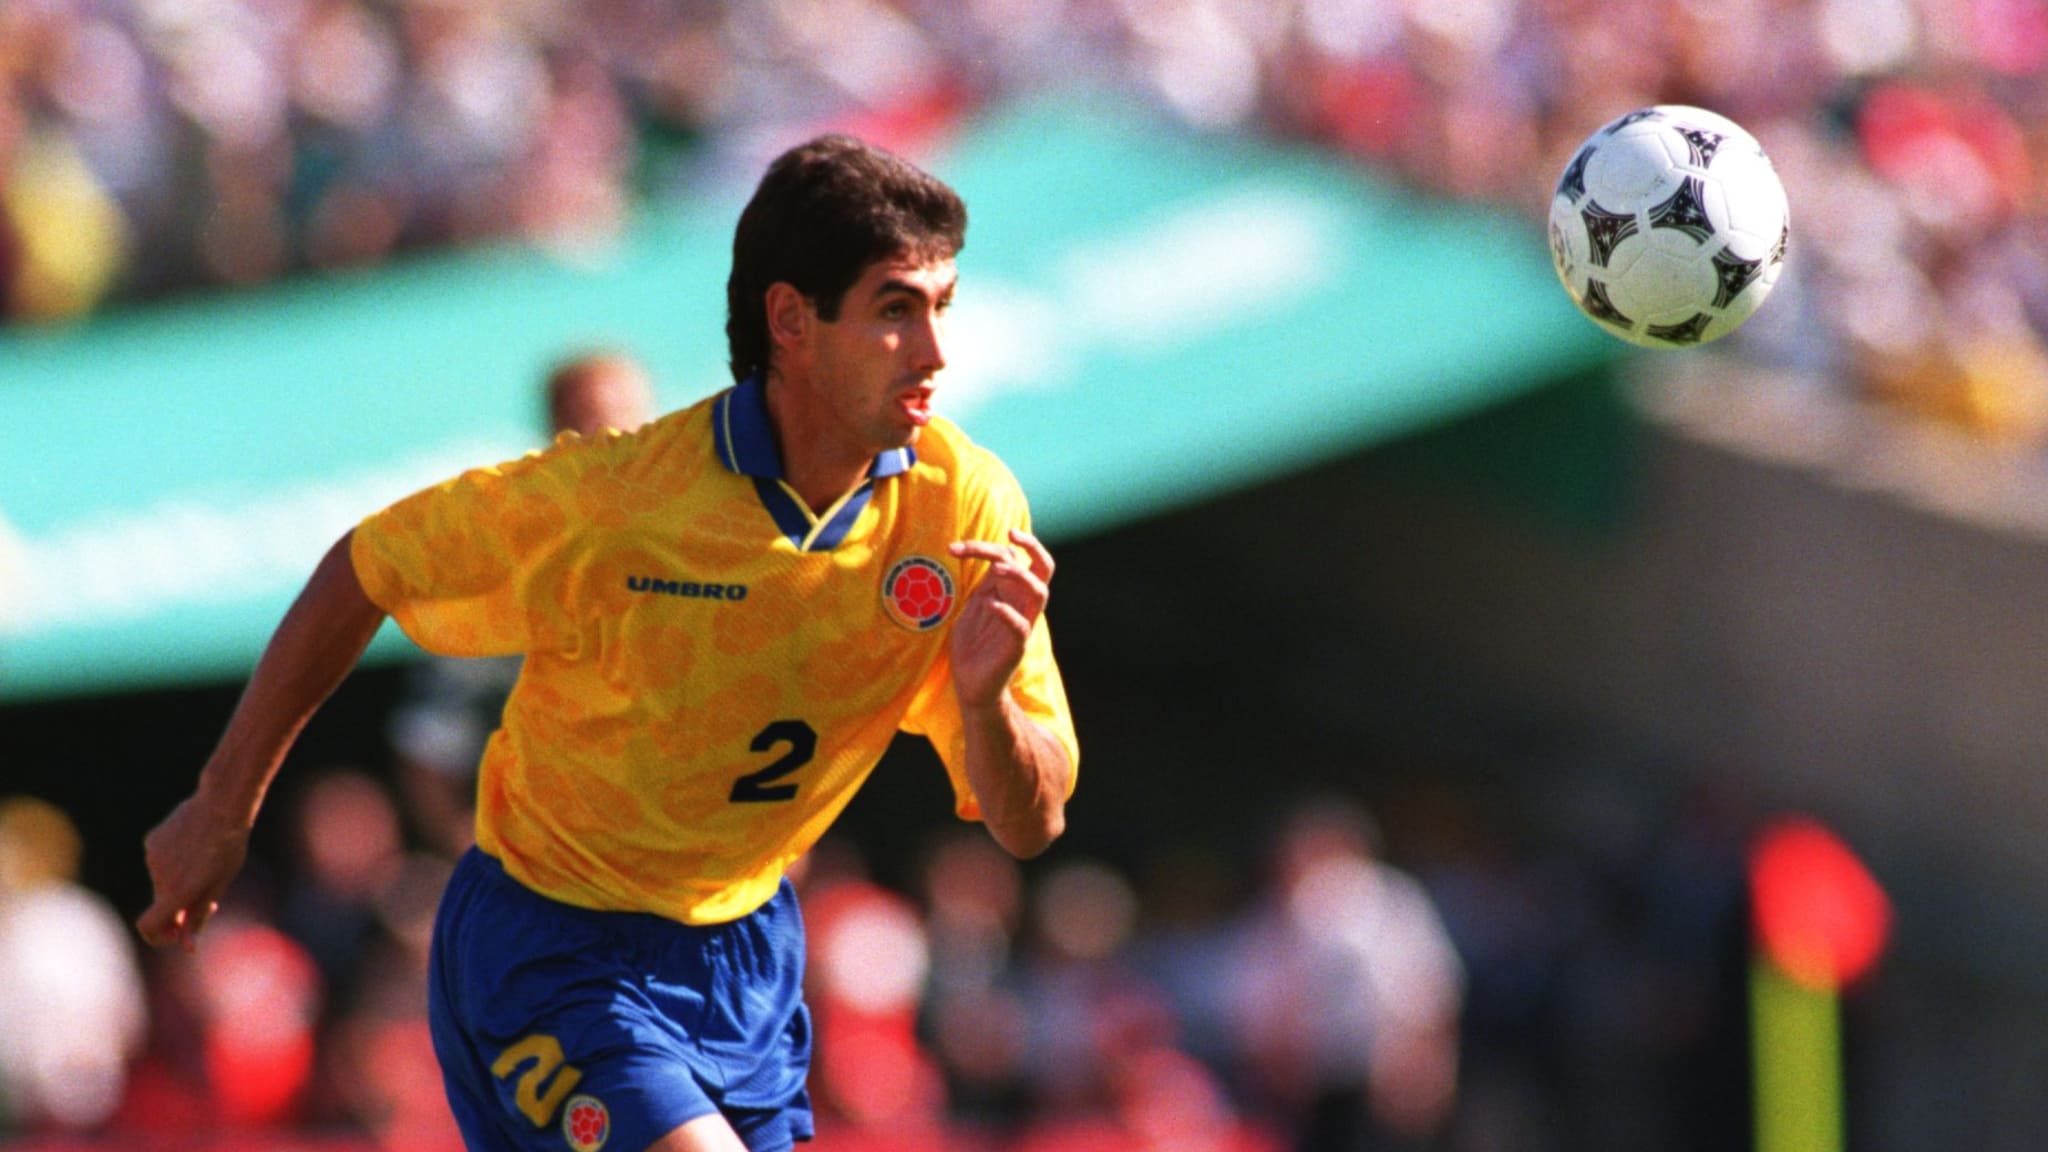 Andres Escobar, 'Life Doesn't End Here'